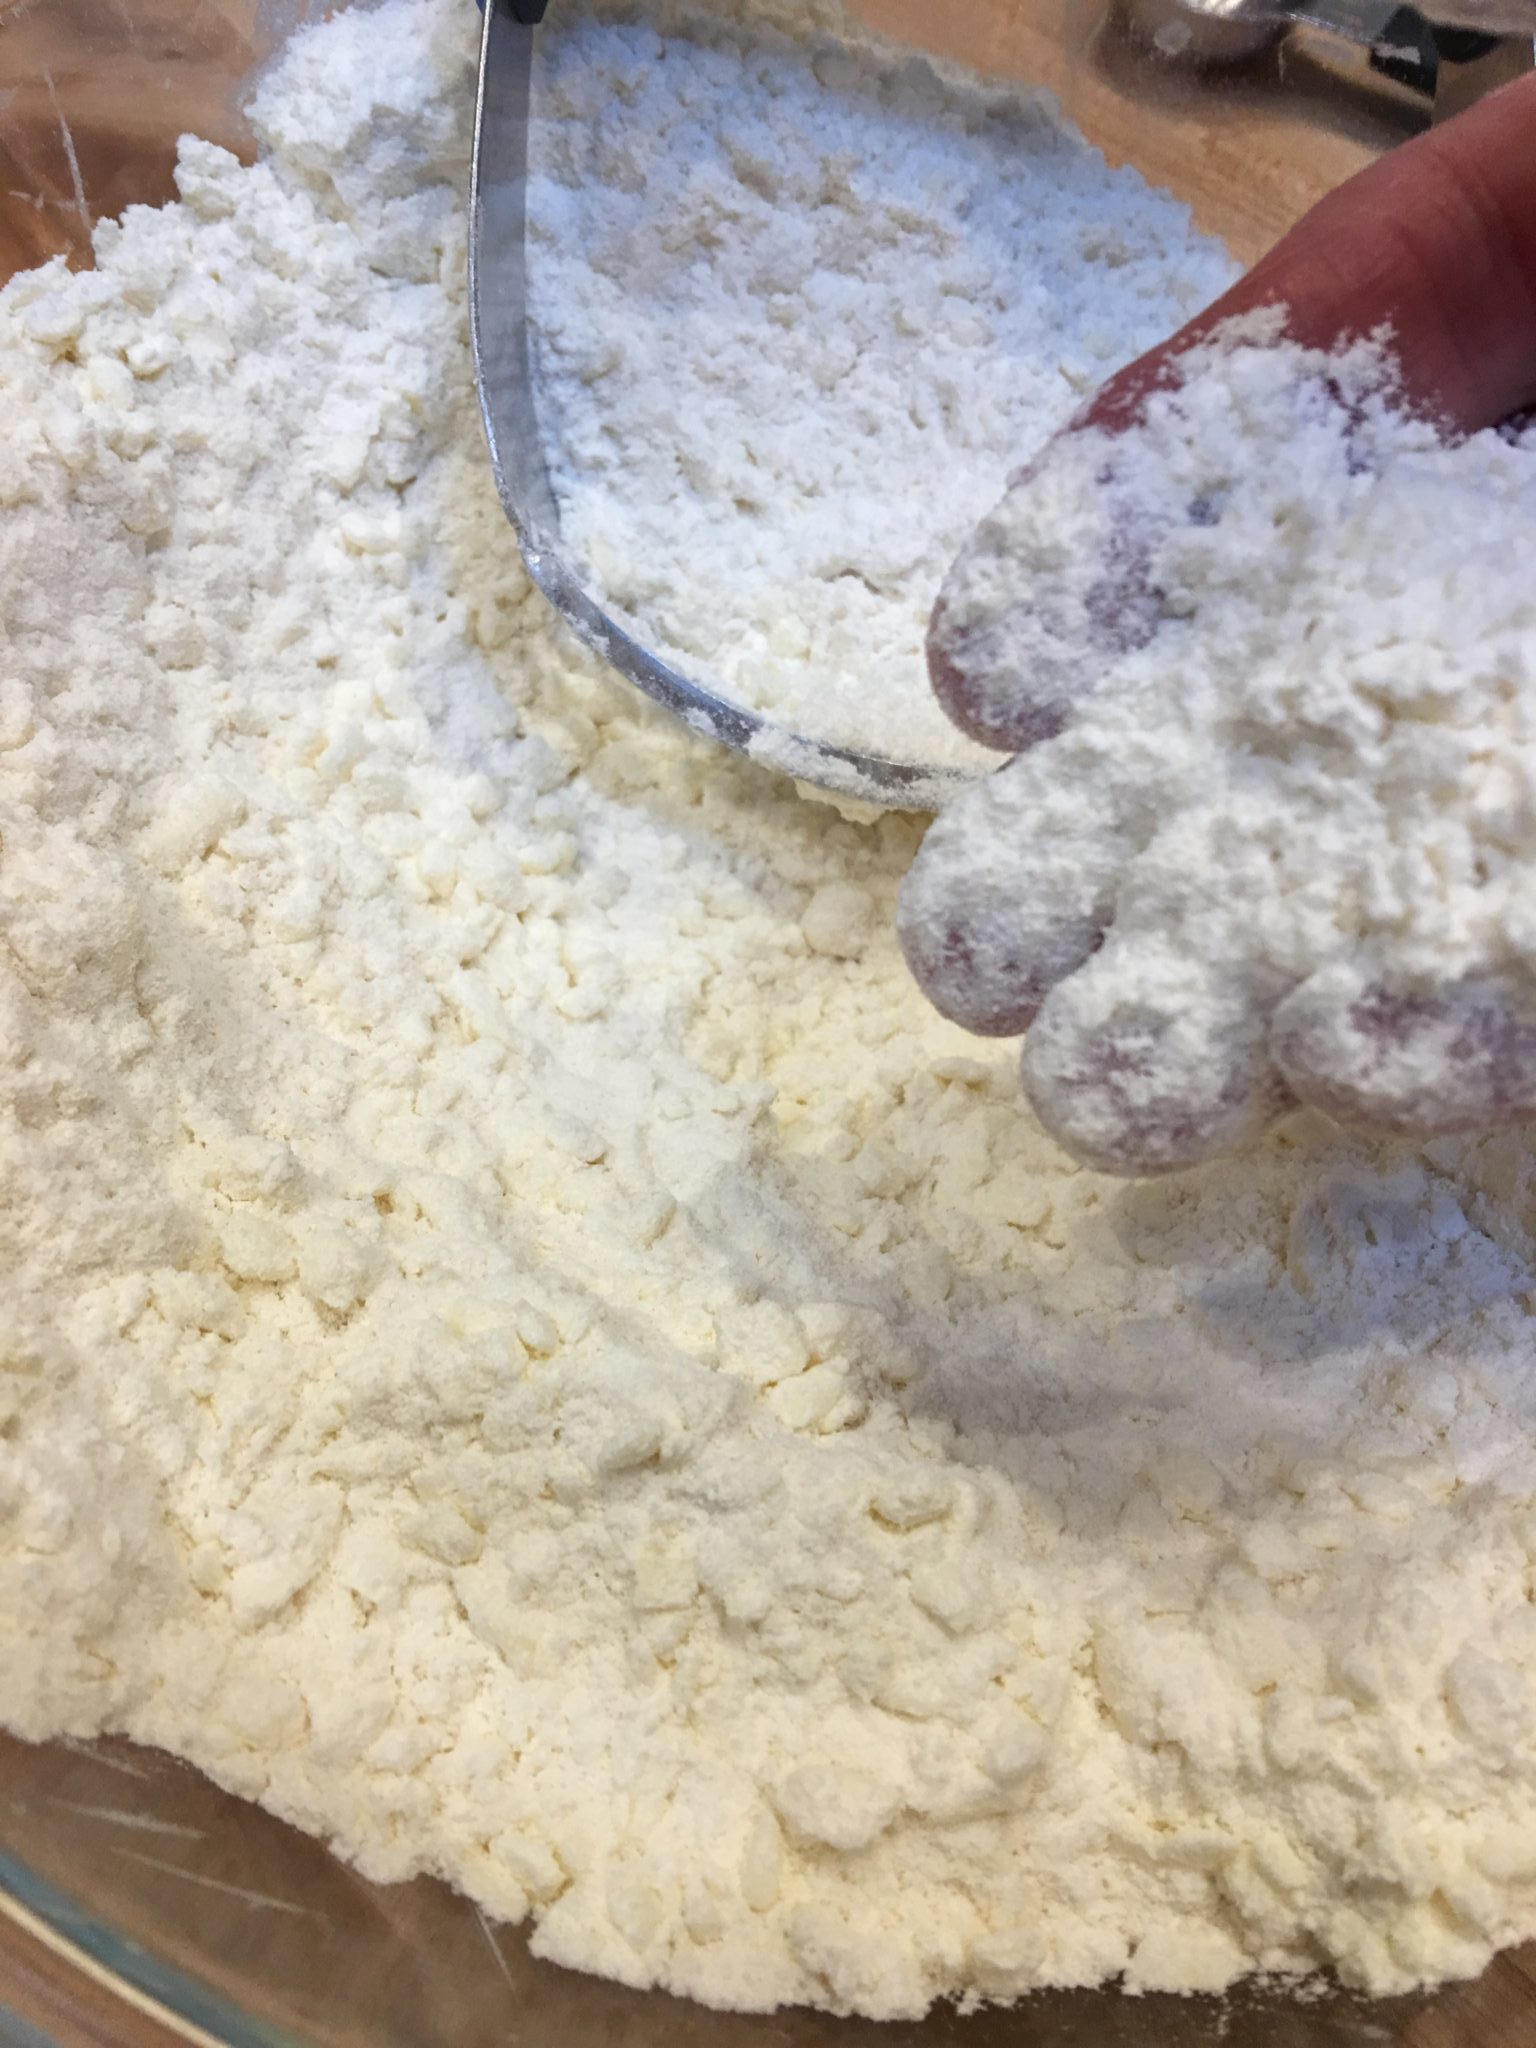 Butter properly cut into flour for pastry